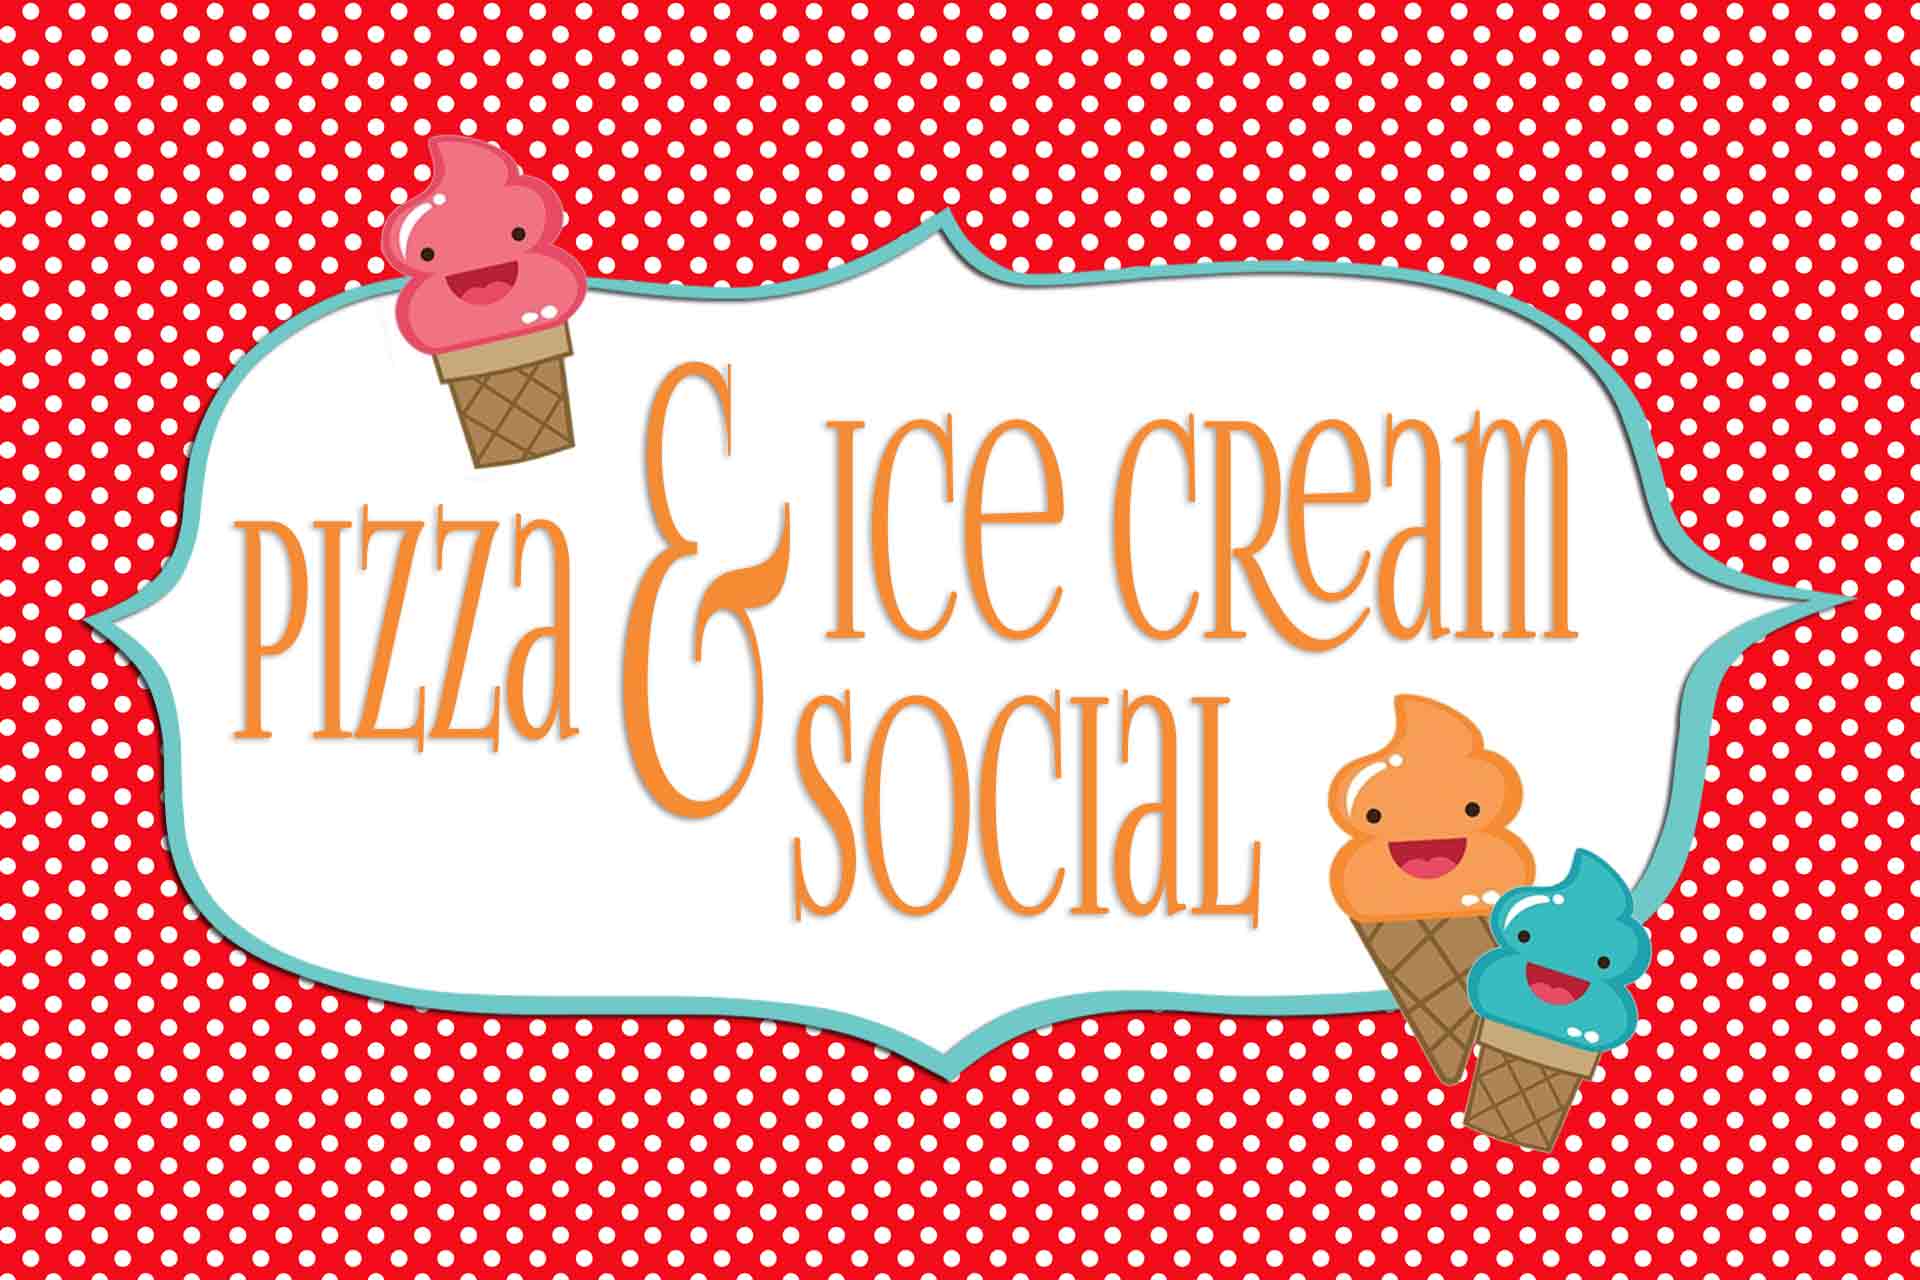 Pizza and Ice Cream Social